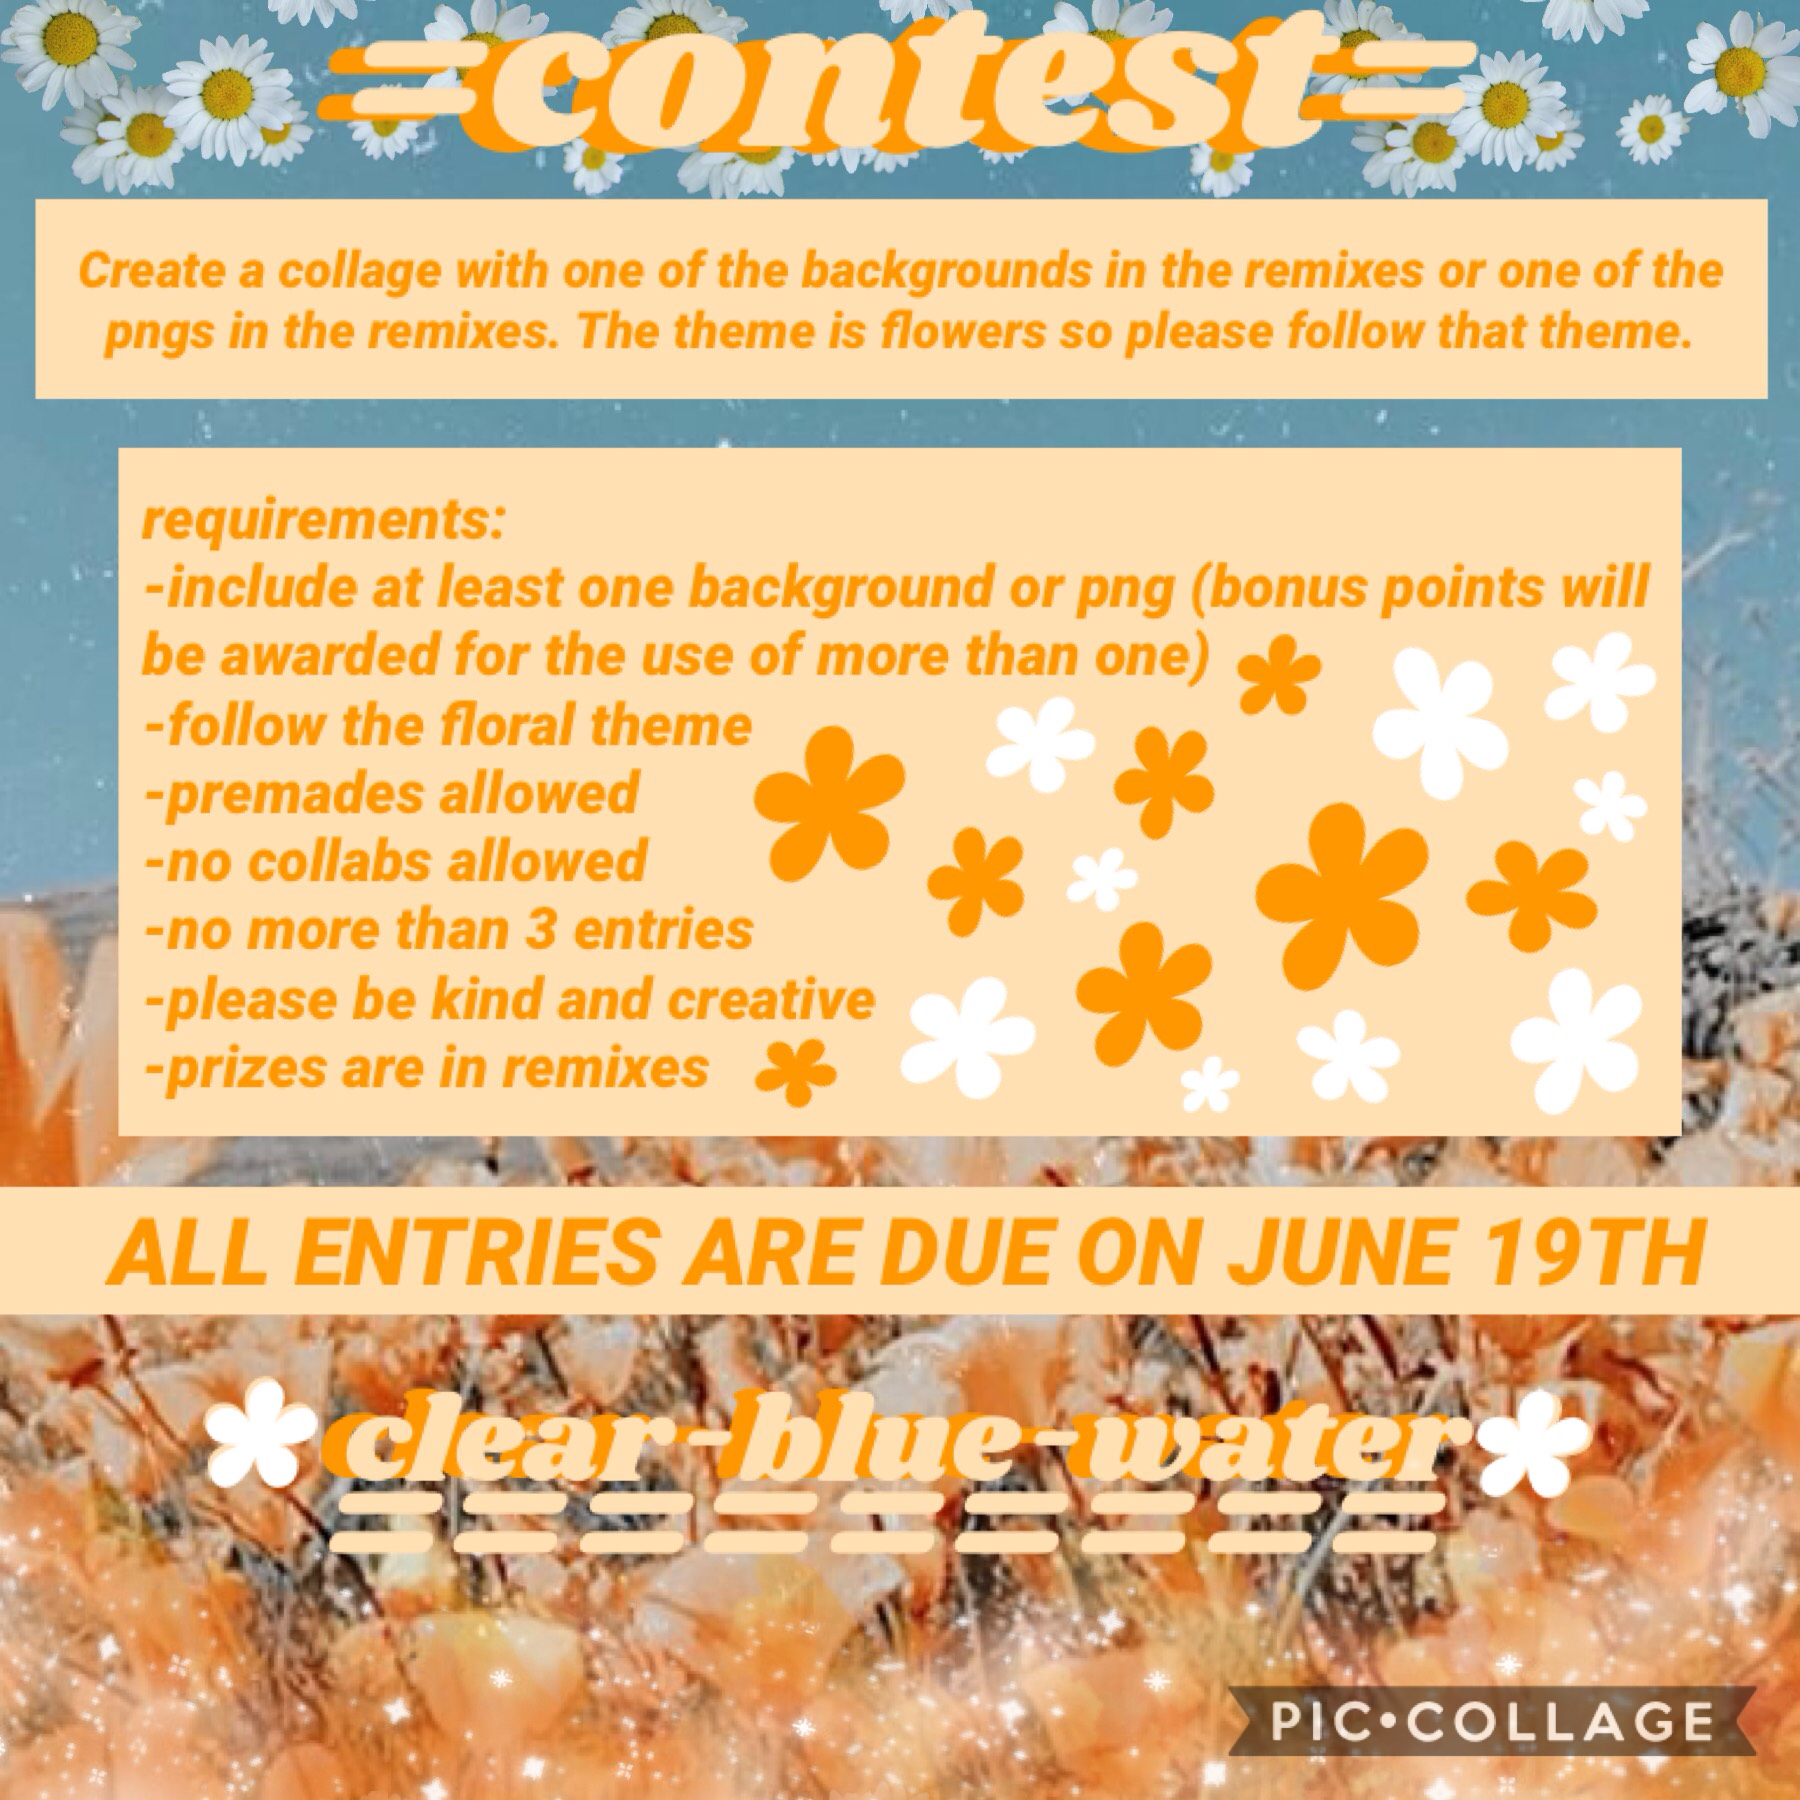 🌻C O N T E S T🌻
I have no reason to make this, but I though it would be fun. Please enter! It would mean a lot to me✨
This contest layout is inspired by @blossomedsoul